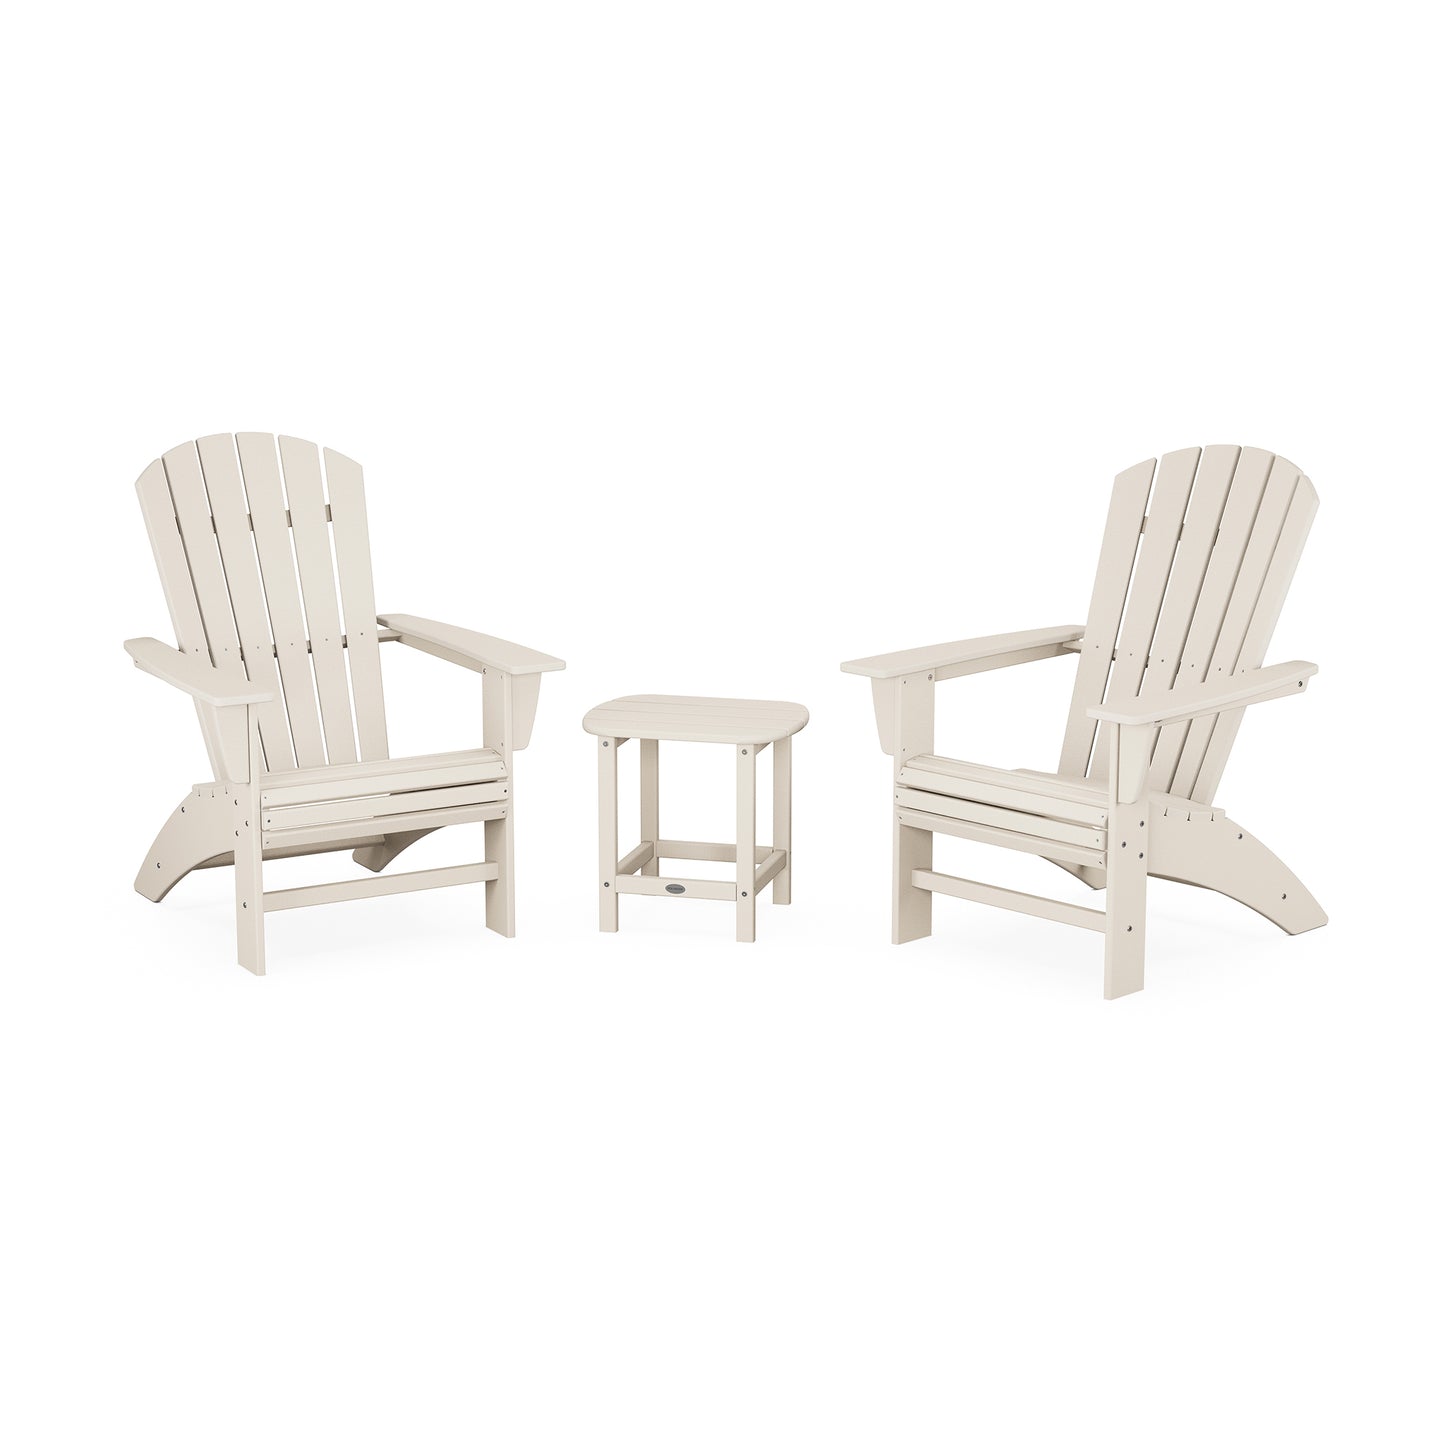 Two POLYWOOD Nautical 3-Piece Curveback Adirondack Sets and a small matching side table on a plain white background. The chairs are arranged facing slightly towards each other.